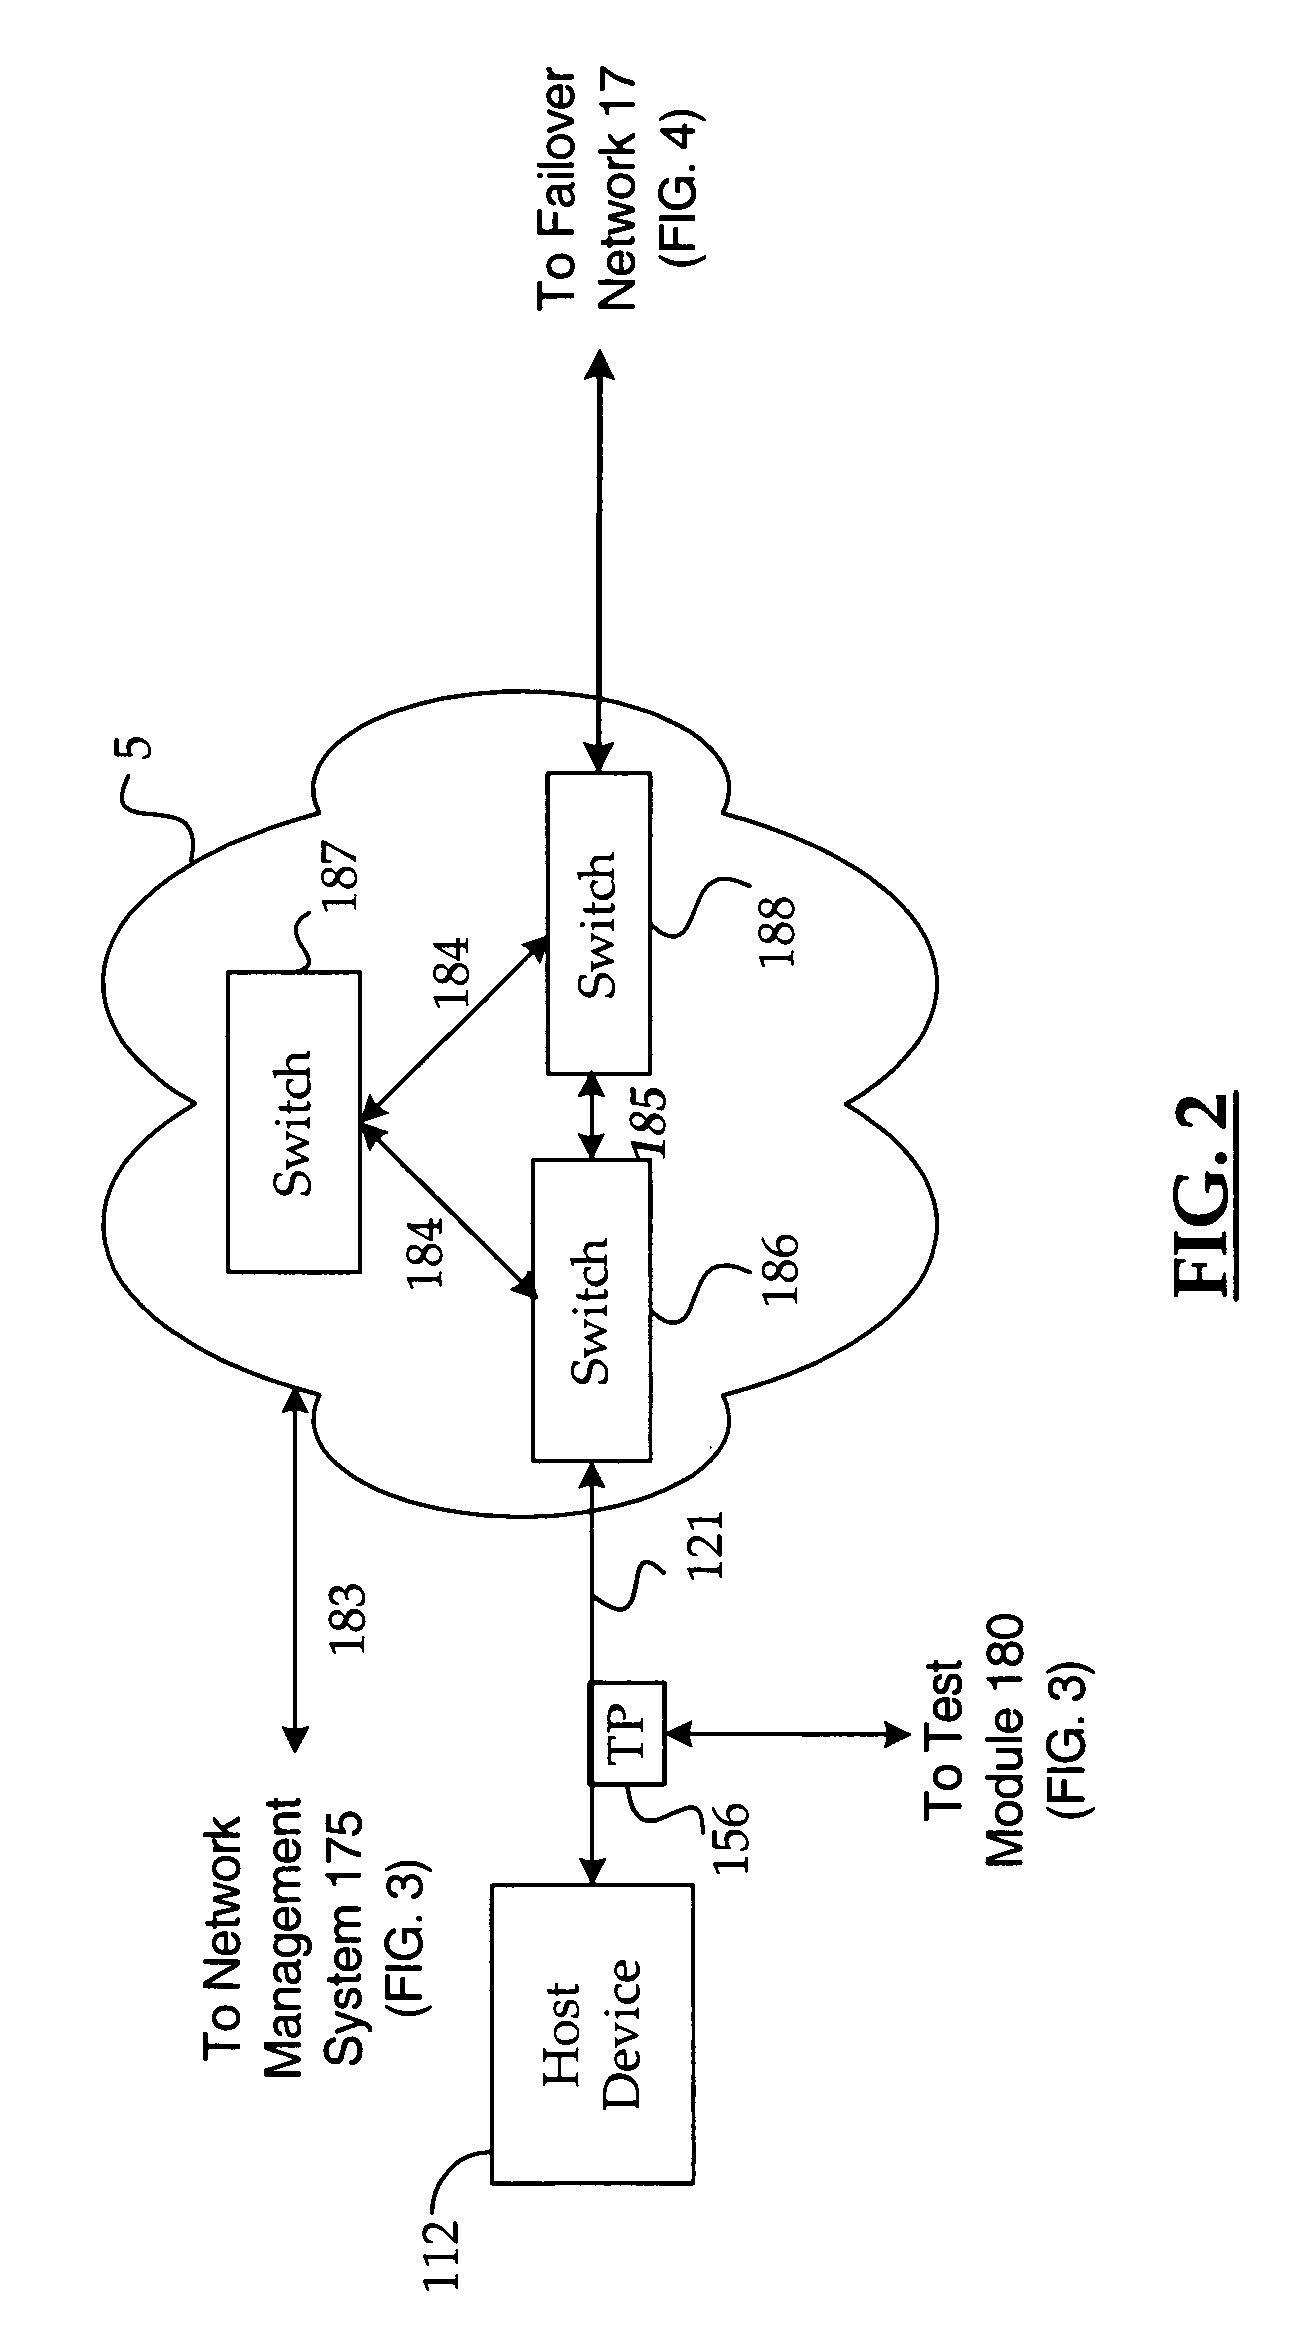 Method and system for automatically rerouting data from an overbalanced logical circuit in a data network